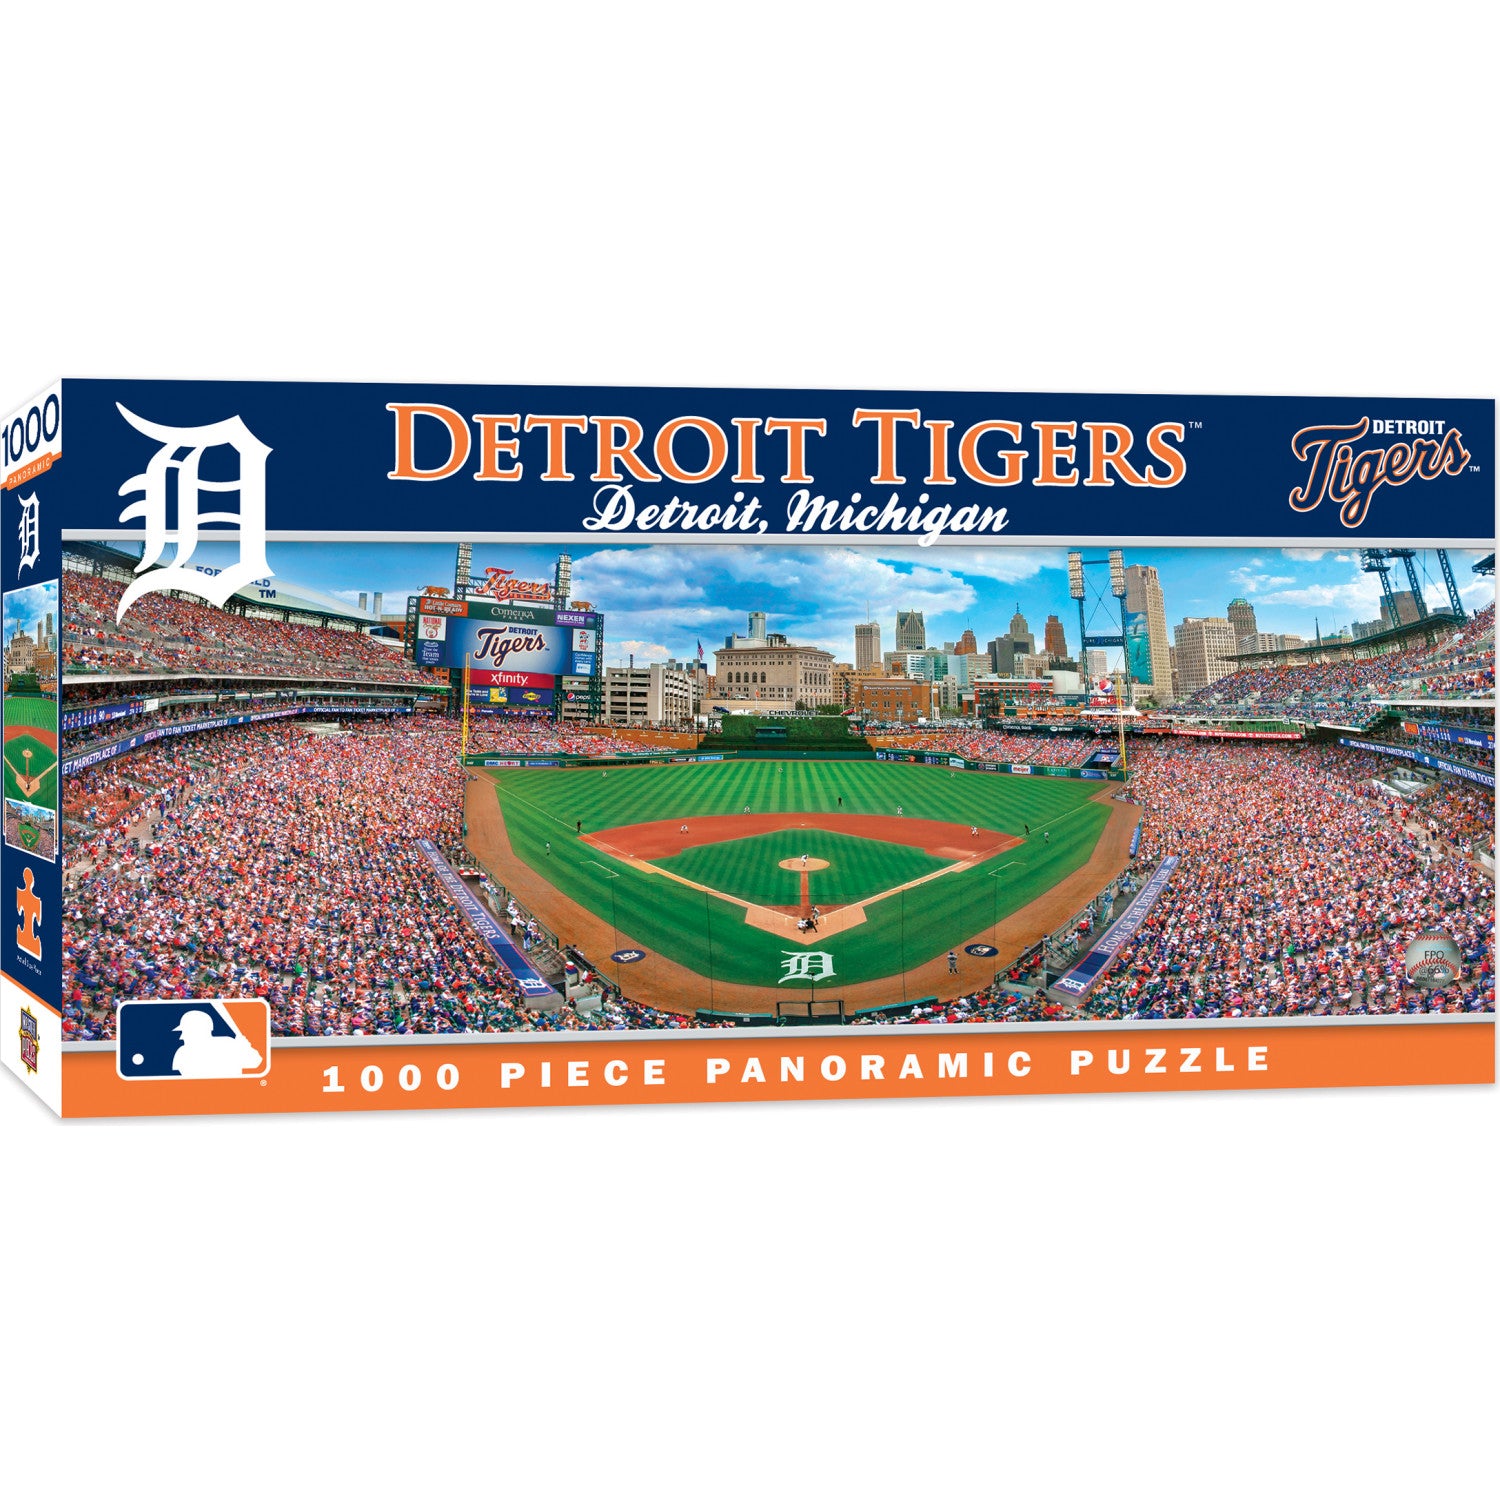 Detroit Tigers - 1000 Piece Panoramic Jigsaw Puzzle